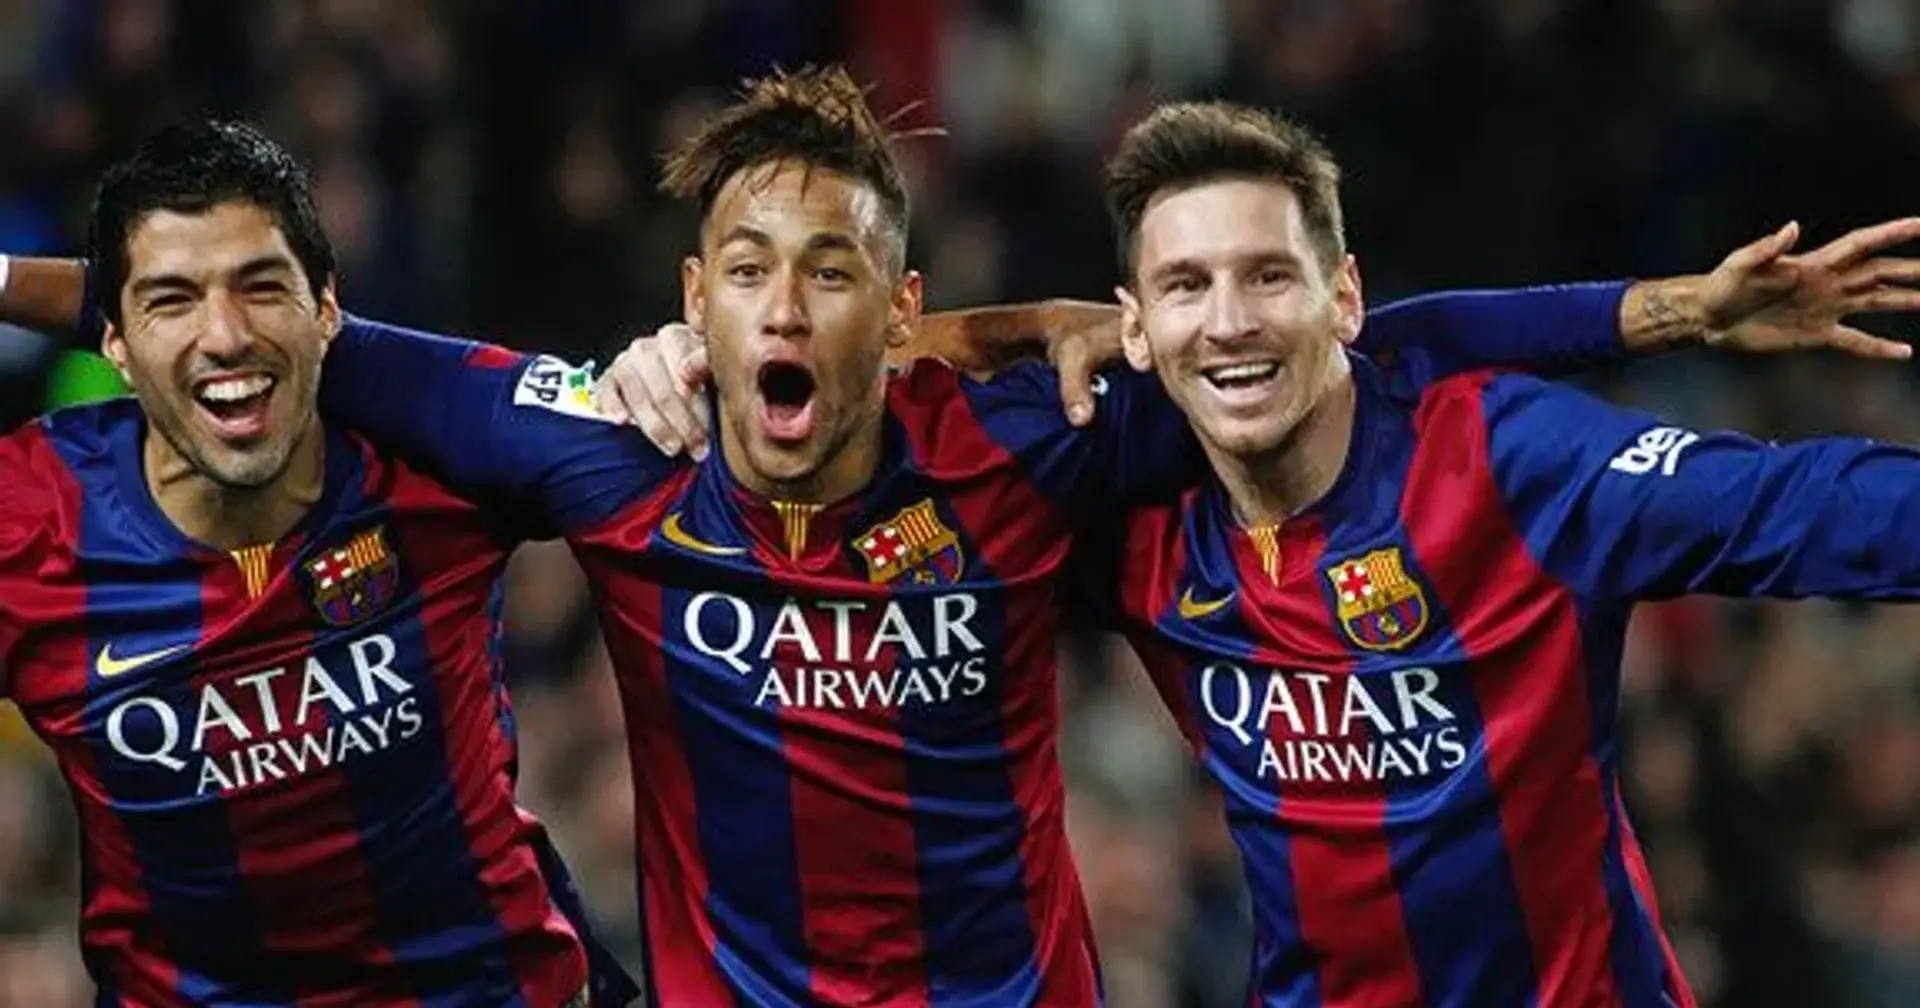 Revealed: how Barcelona have spent €500m trying to replace Messi, Suarez and Neymar